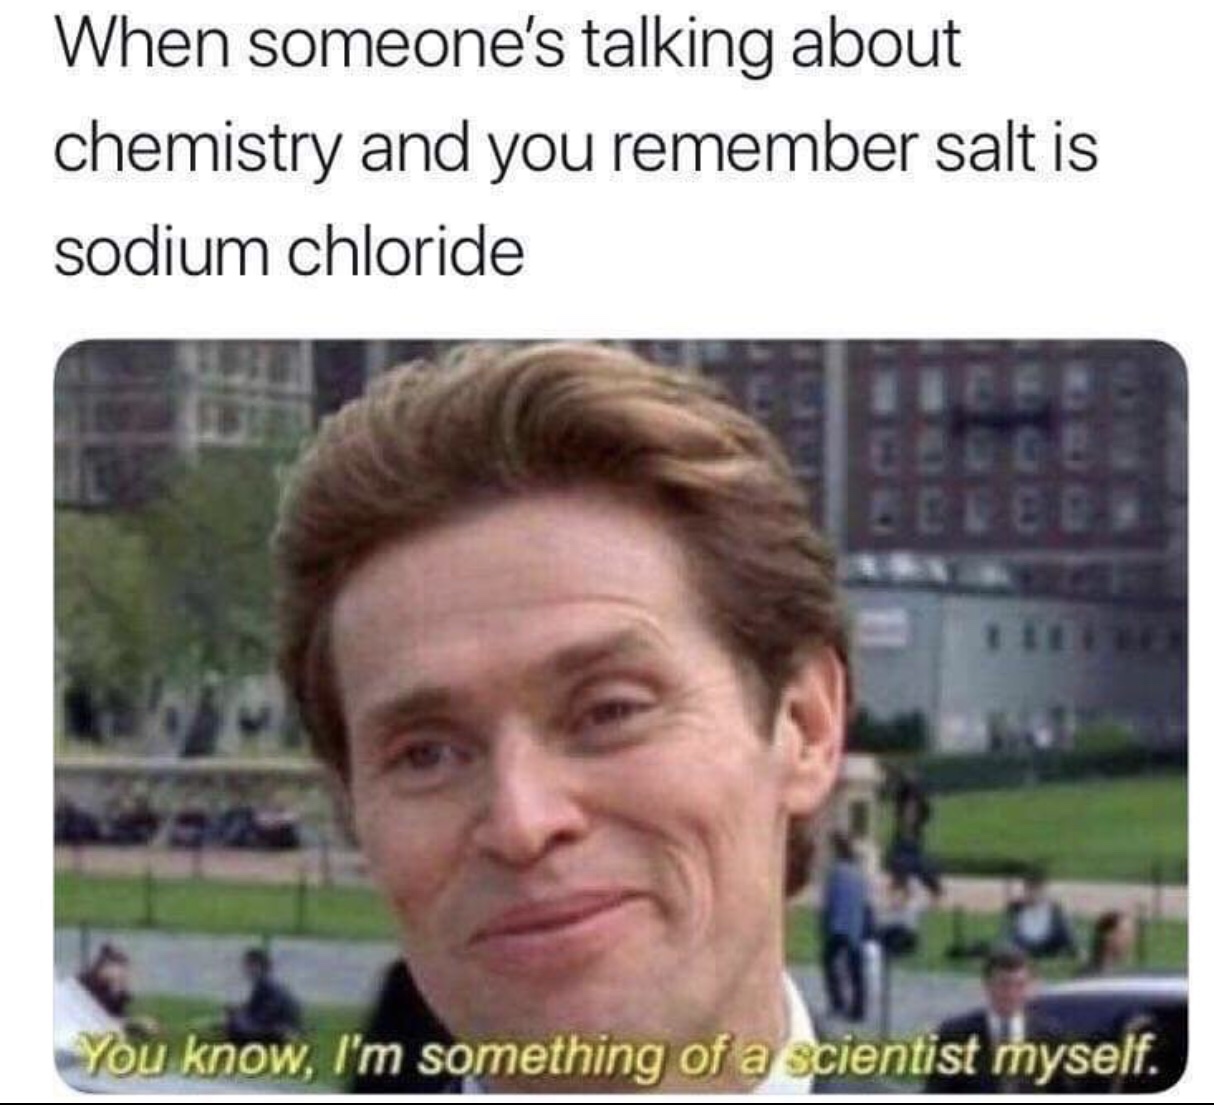 norman osborn - When someone's talking about chemistry and you remember salt is sodium chloride You know, I'm something of a scientist myself.